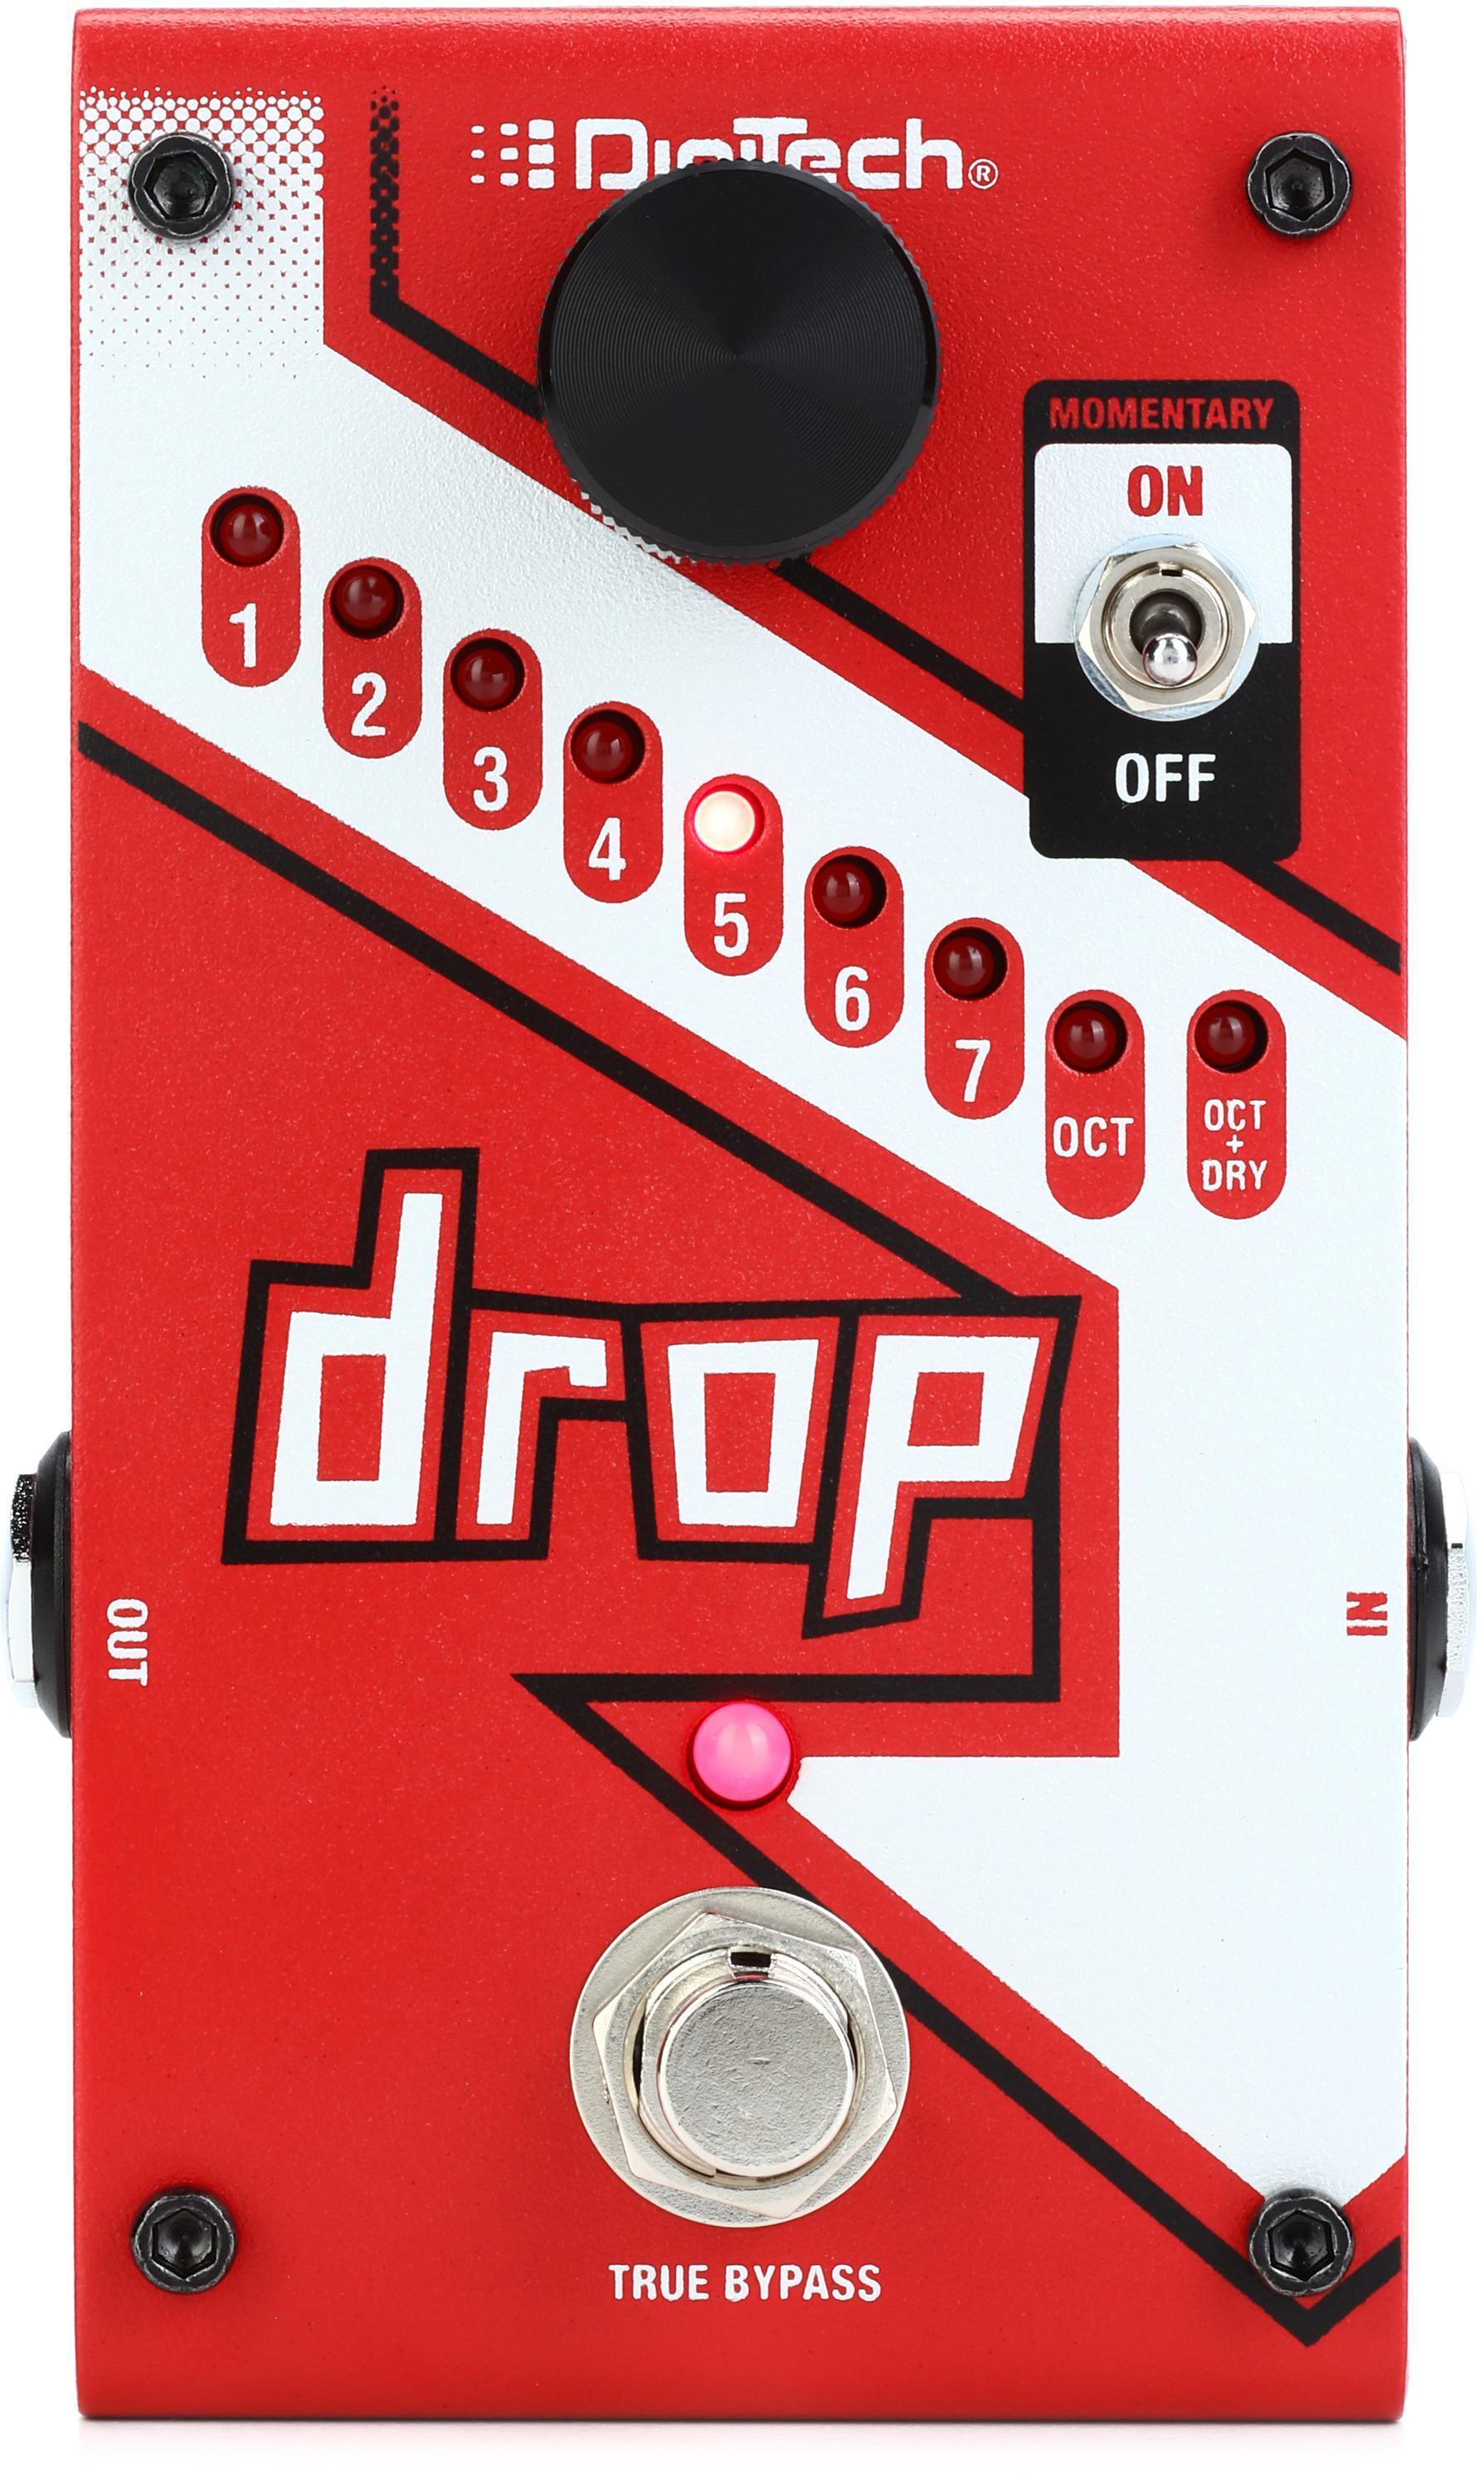 DigiTech Drop Polyphonic Drop Tune Pitch-Shift Pedal | Sweetwater